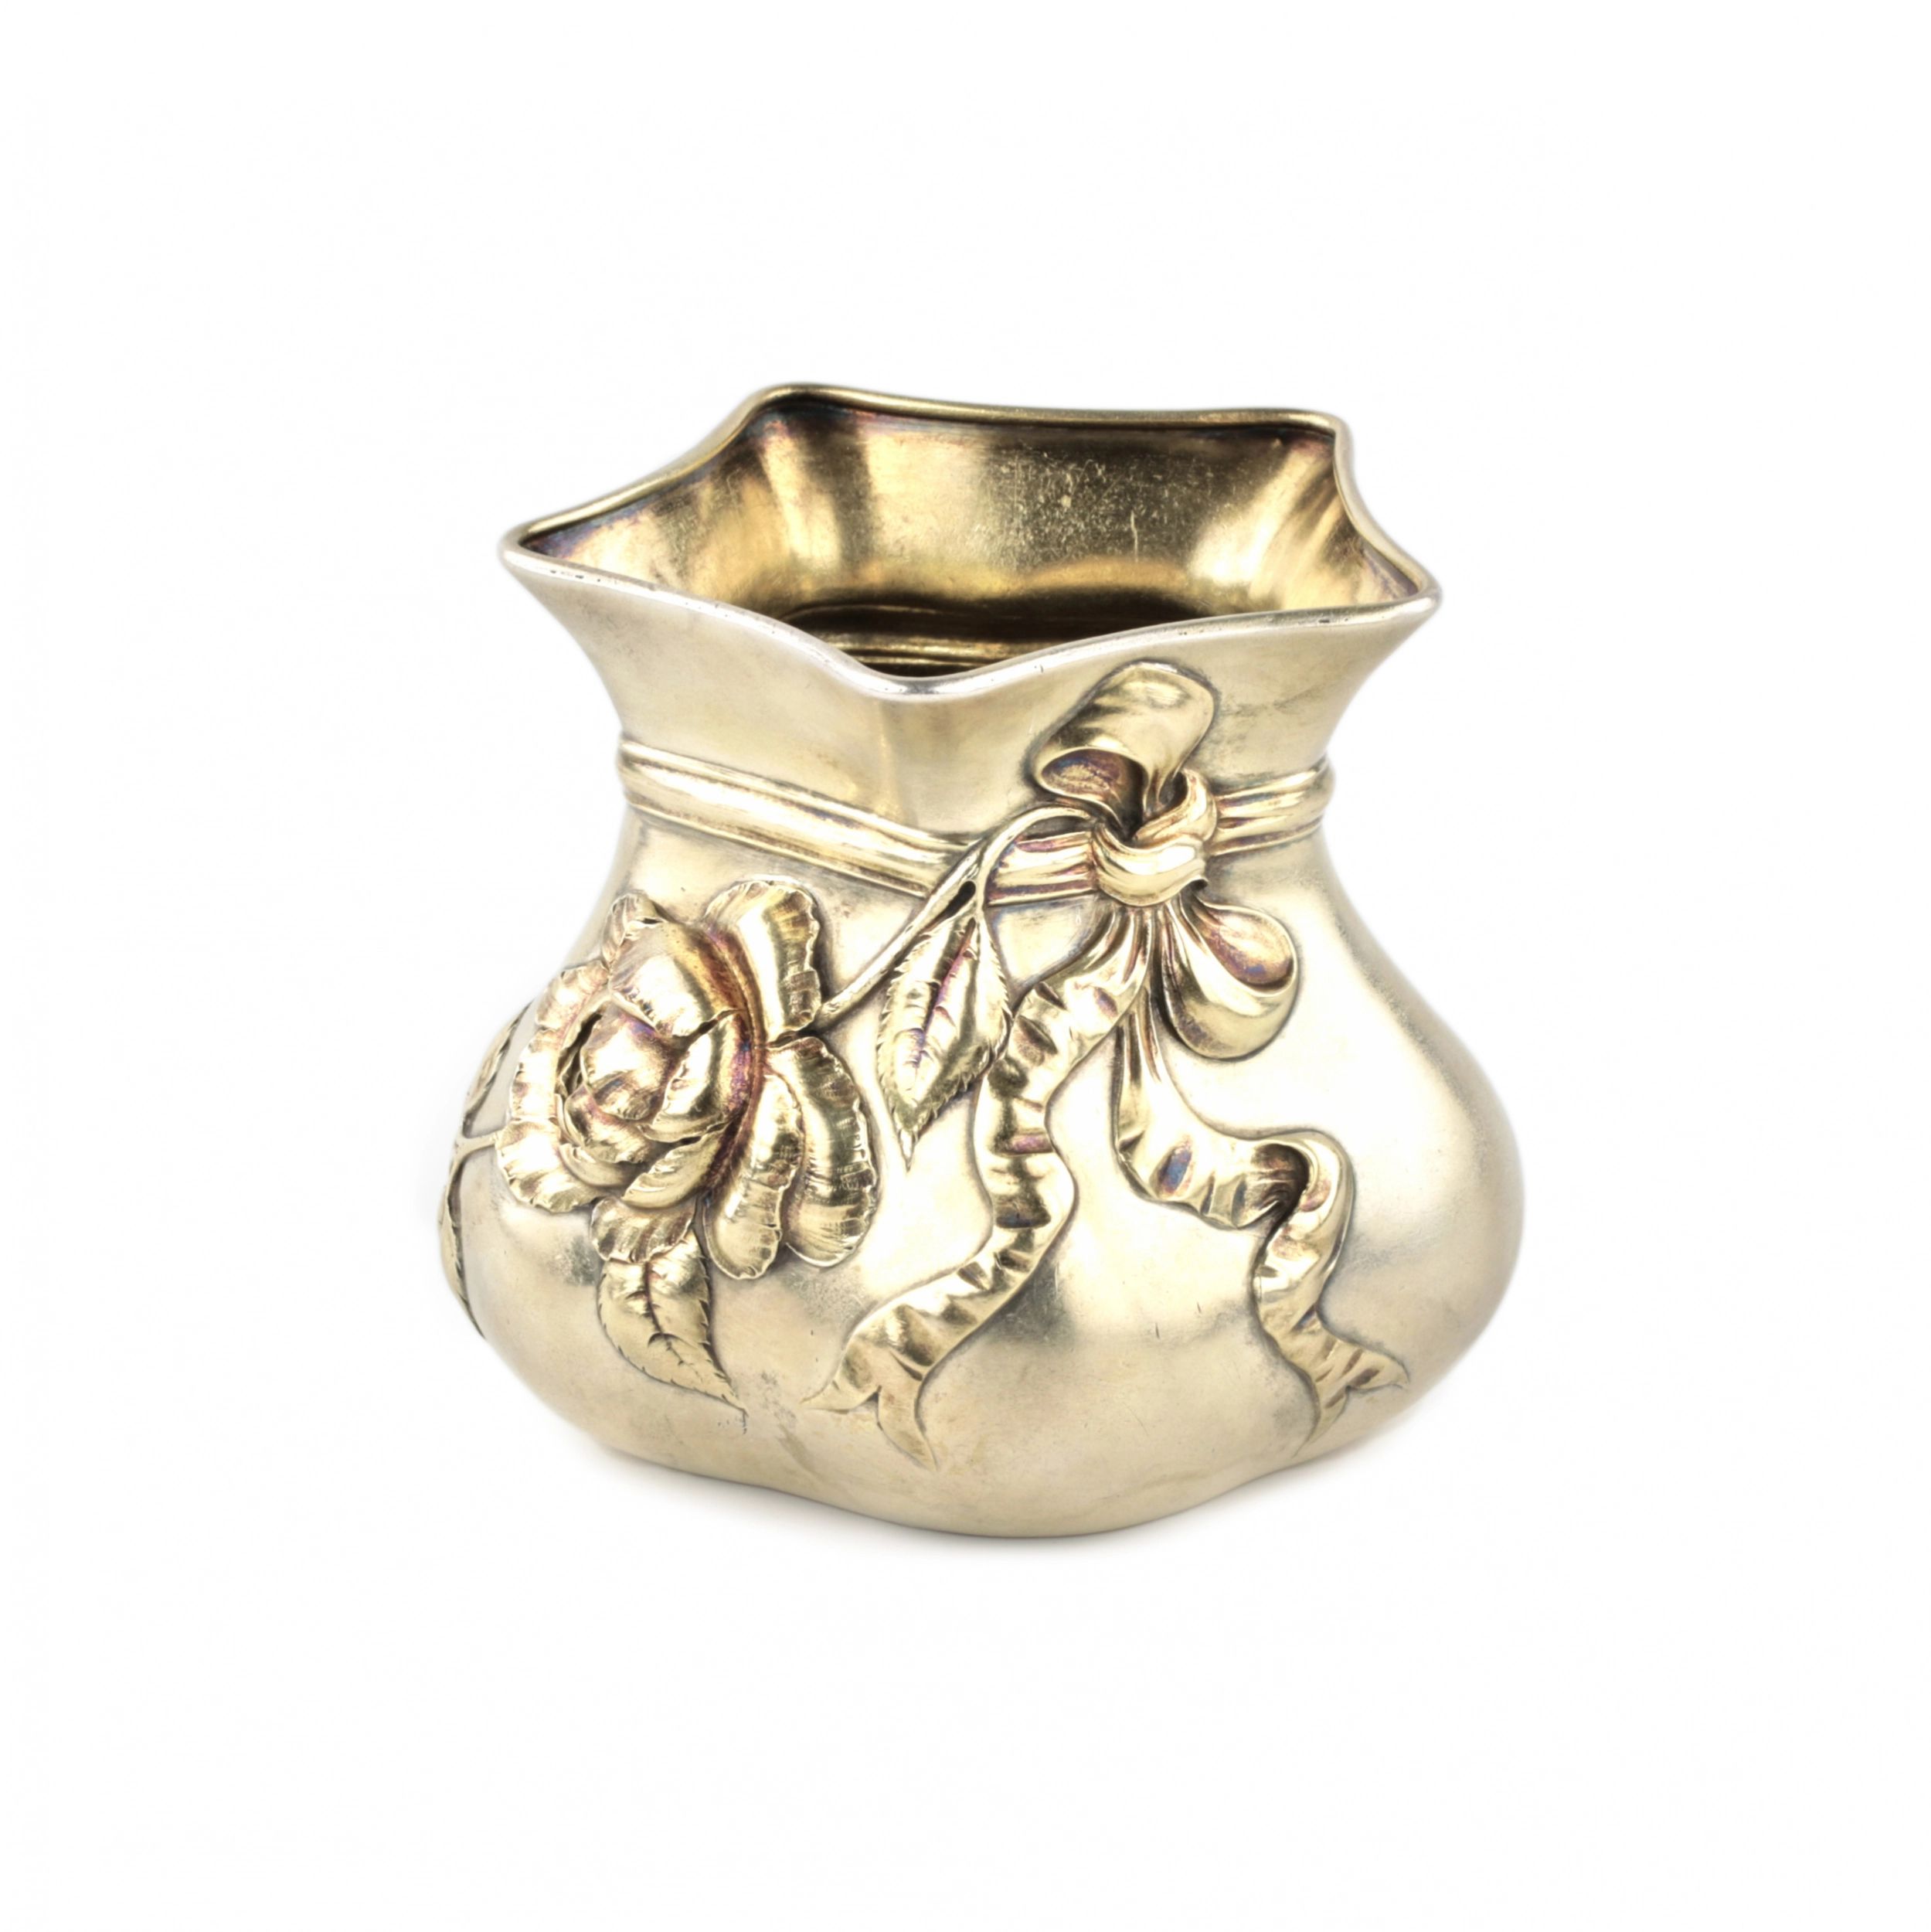 Silver-box-vase-by-Orest-Kurlyukov-in-the-form-of-a-tied-bag